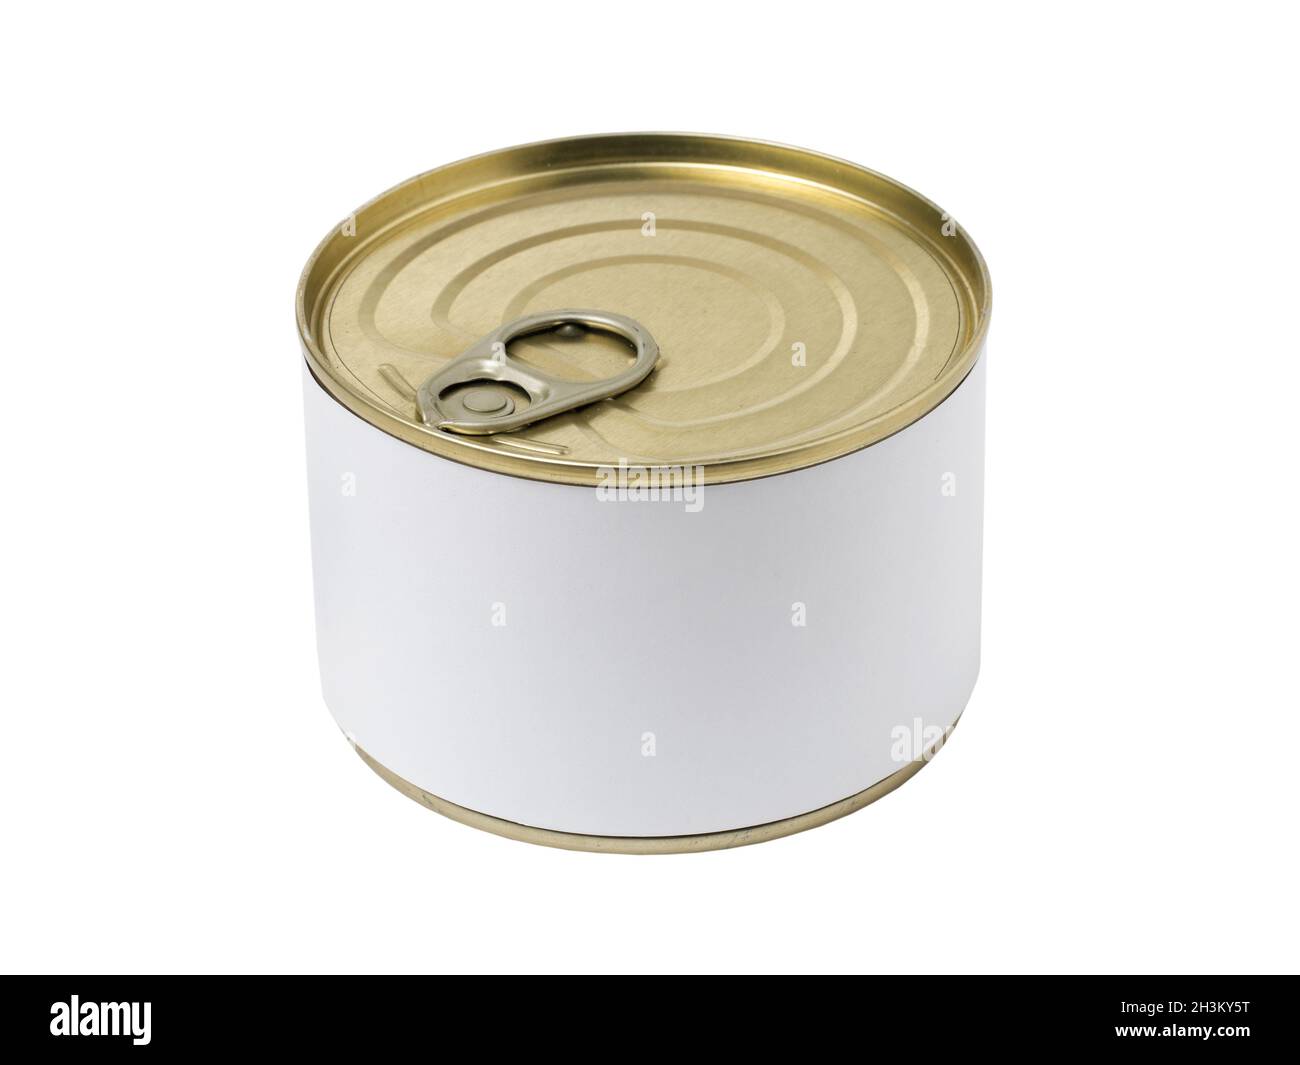 Tin can with blank label and with key on the cap, isolated on white background. Stock Photo